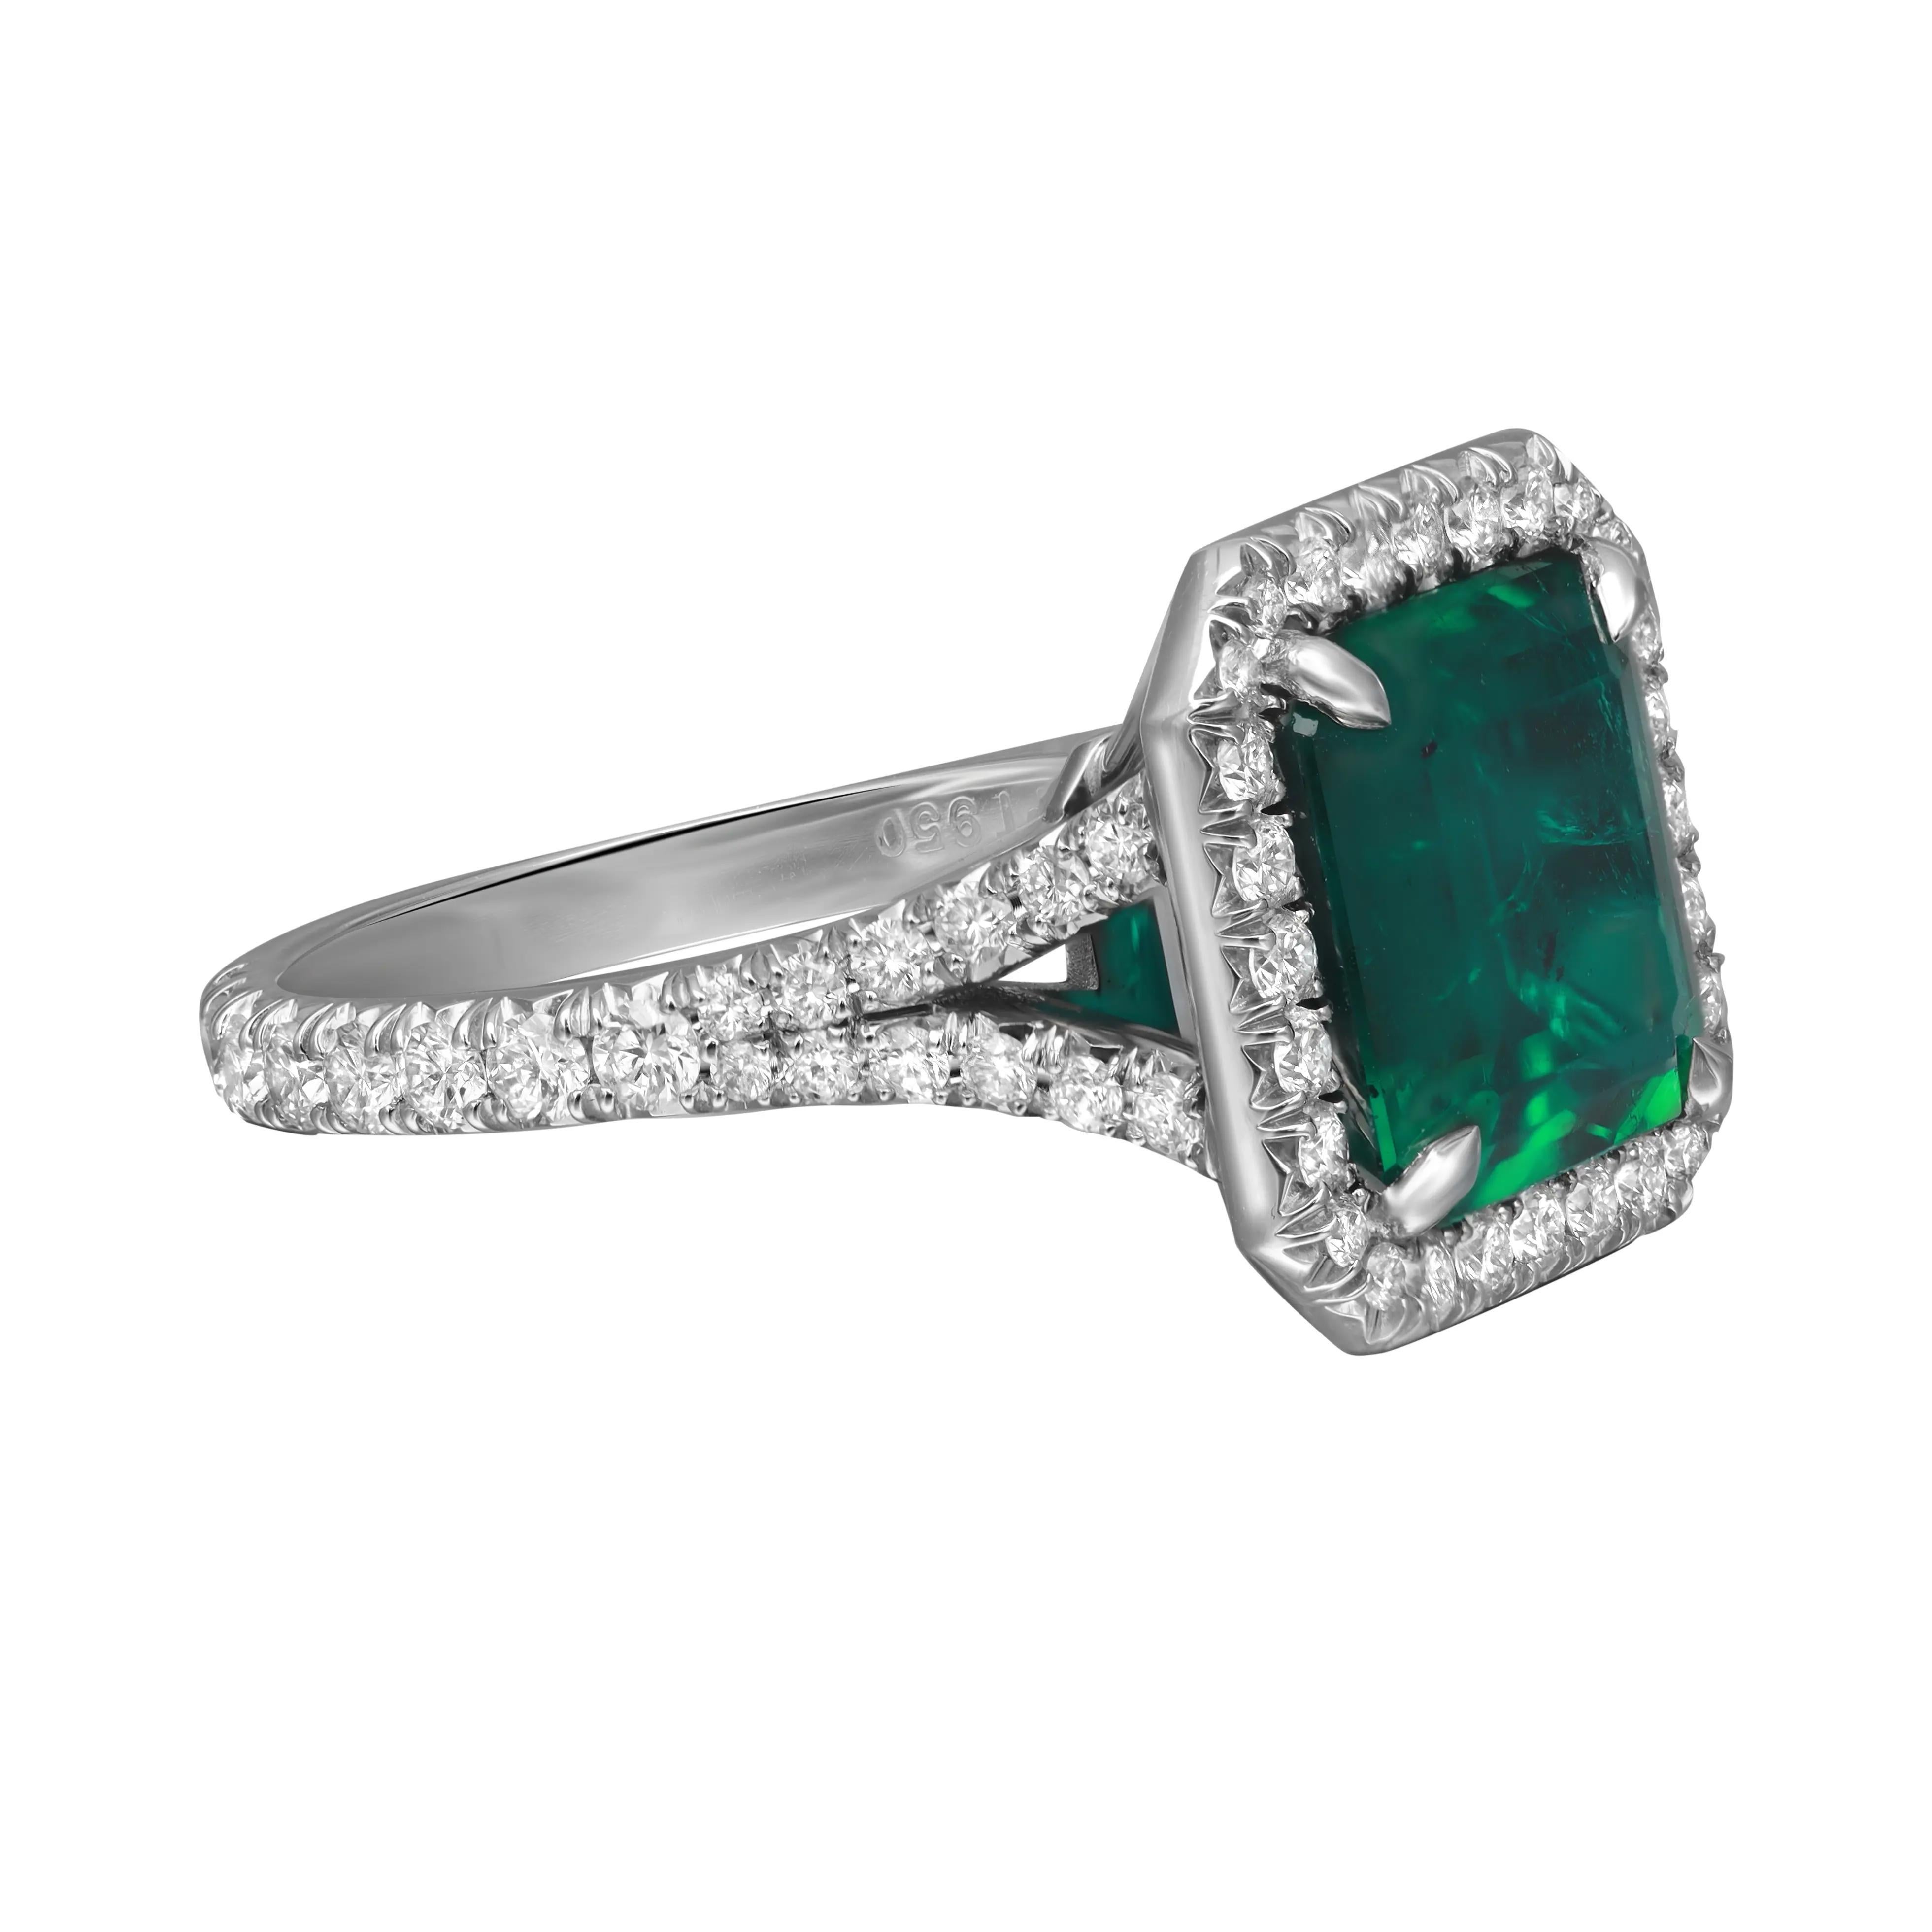 This breathtaking engagement ring features a beautiful GIA Certified 3.57 carats of octagonal Zambian green Emerald as the centerpiece with 0.90 carat of round brilliant cut diamond accents surrounding the gem in a sparkling halo setting and